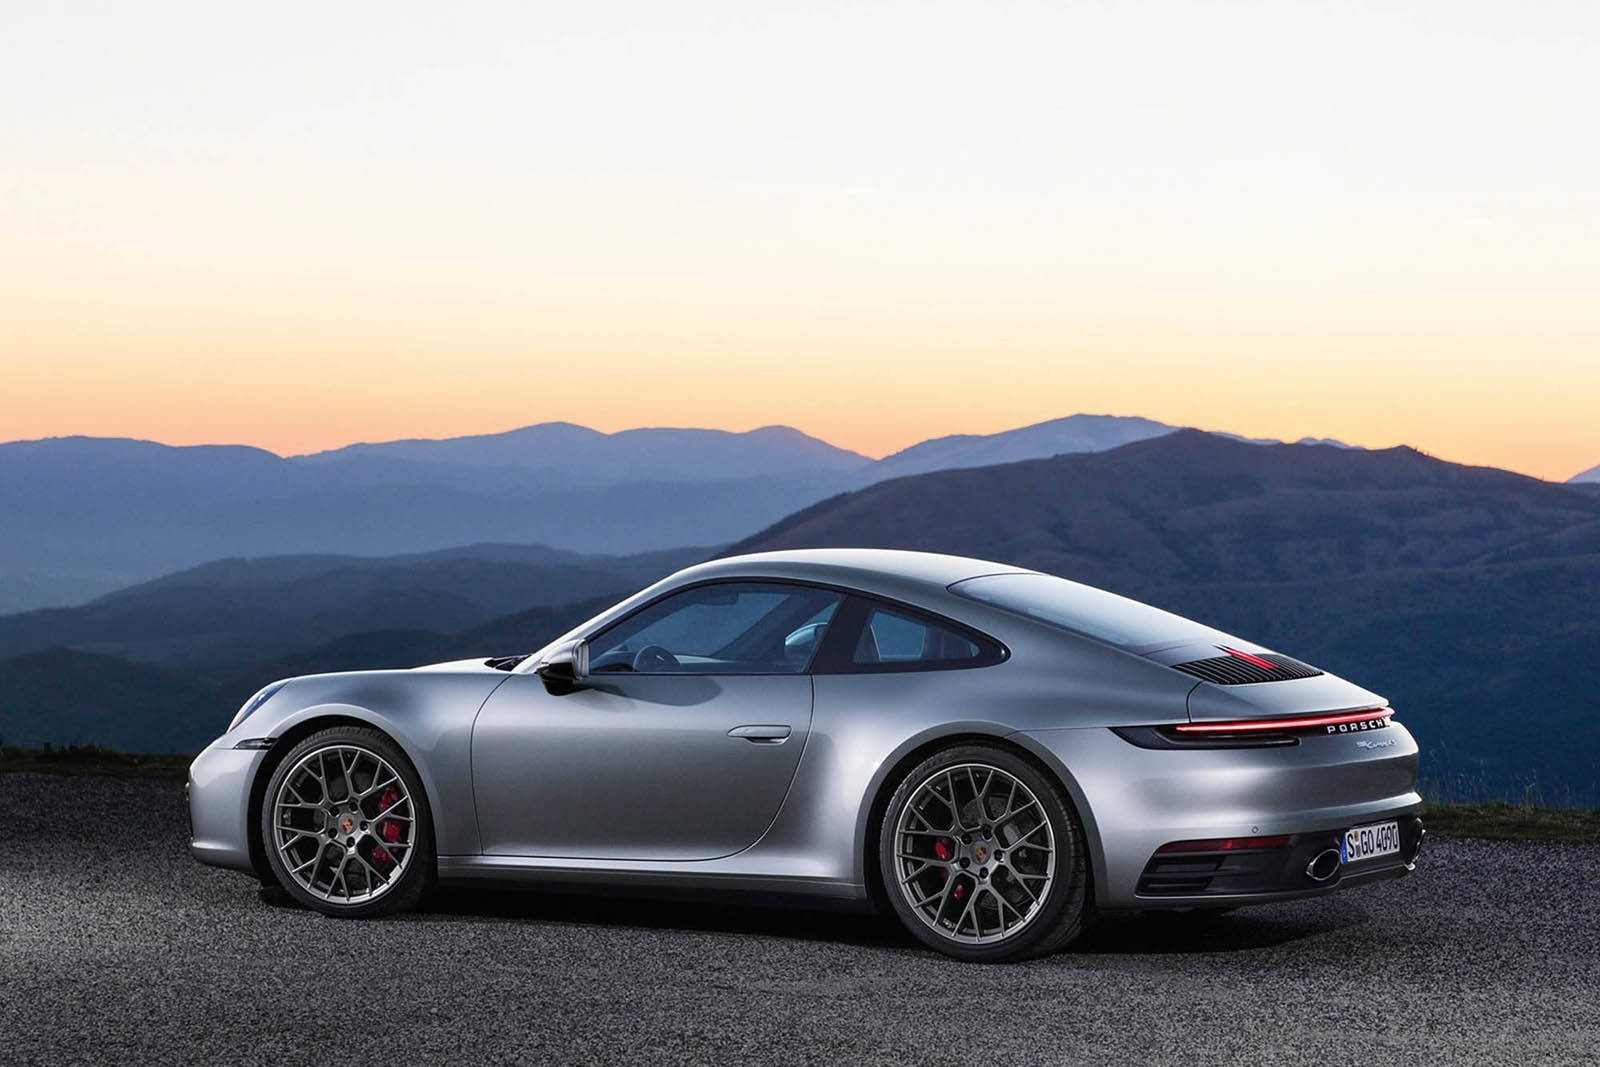 For the Carrera 4S, the 4 refers to all-wheel-drive and the S is a performance step up in power from the base 911: 443 horses versus 379.